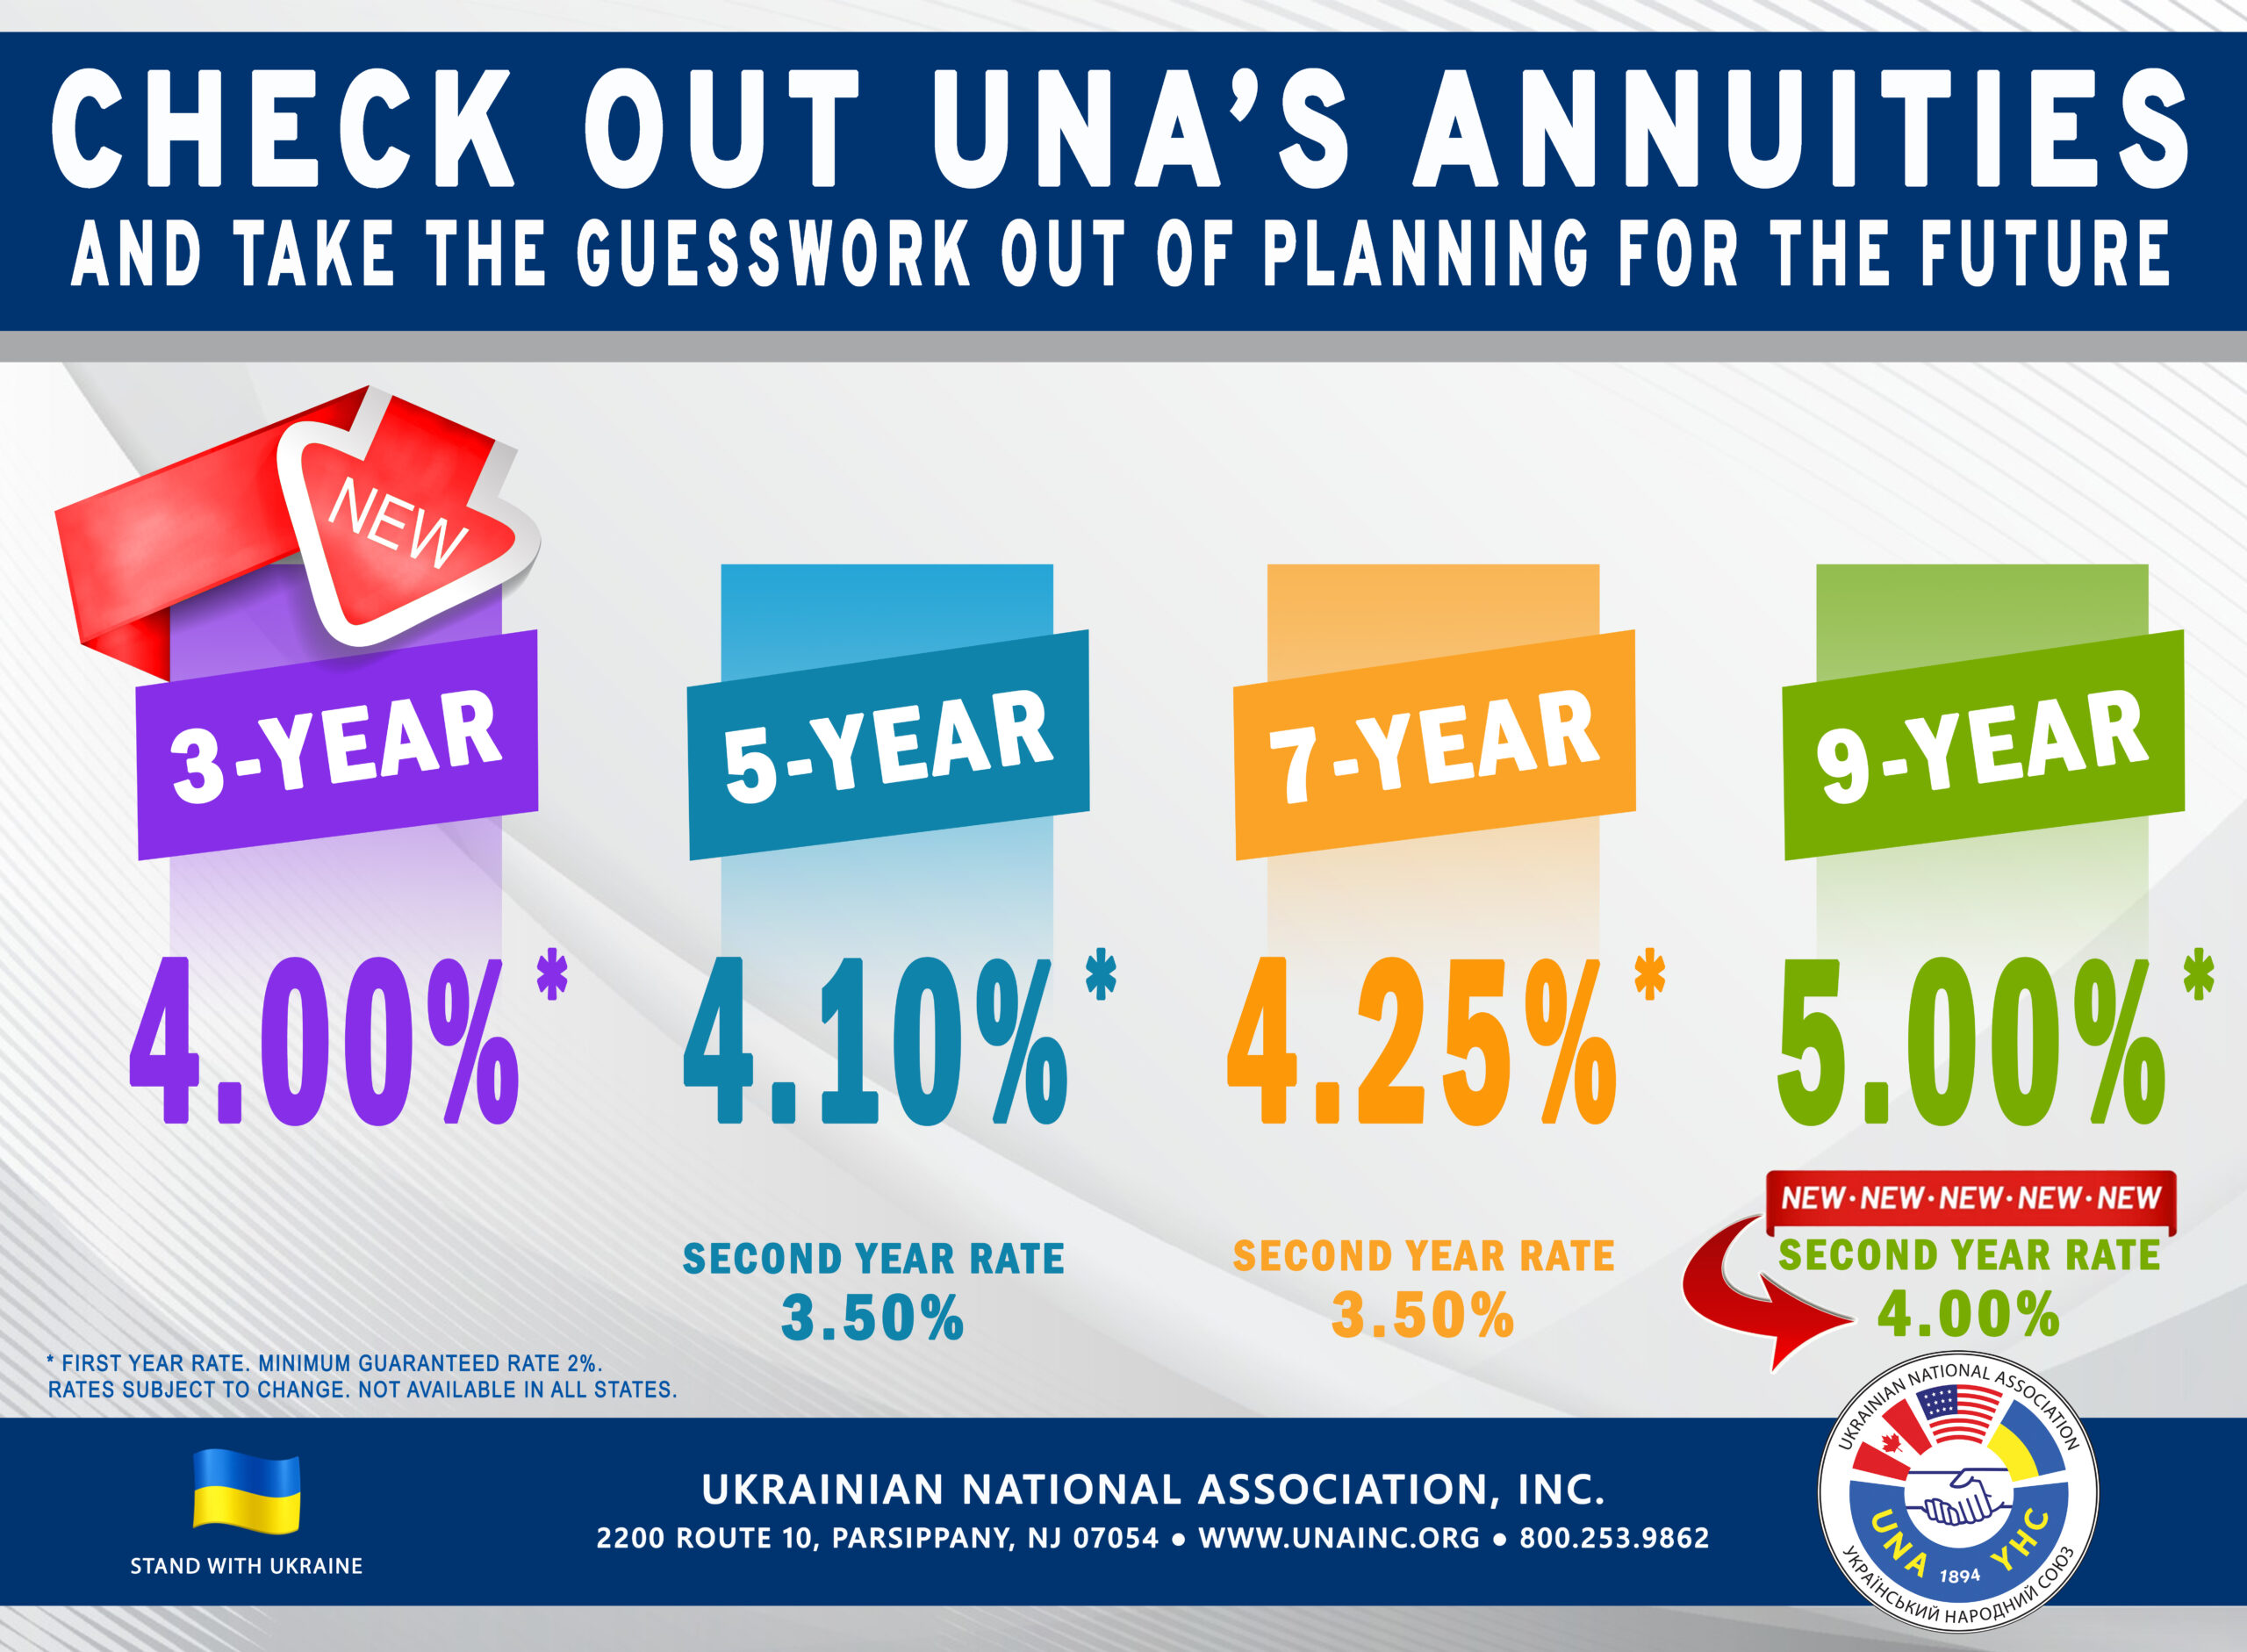 CHECK OUT UNA’S ANNUITIES and Take The Guesswork Out Of Planning For The Future